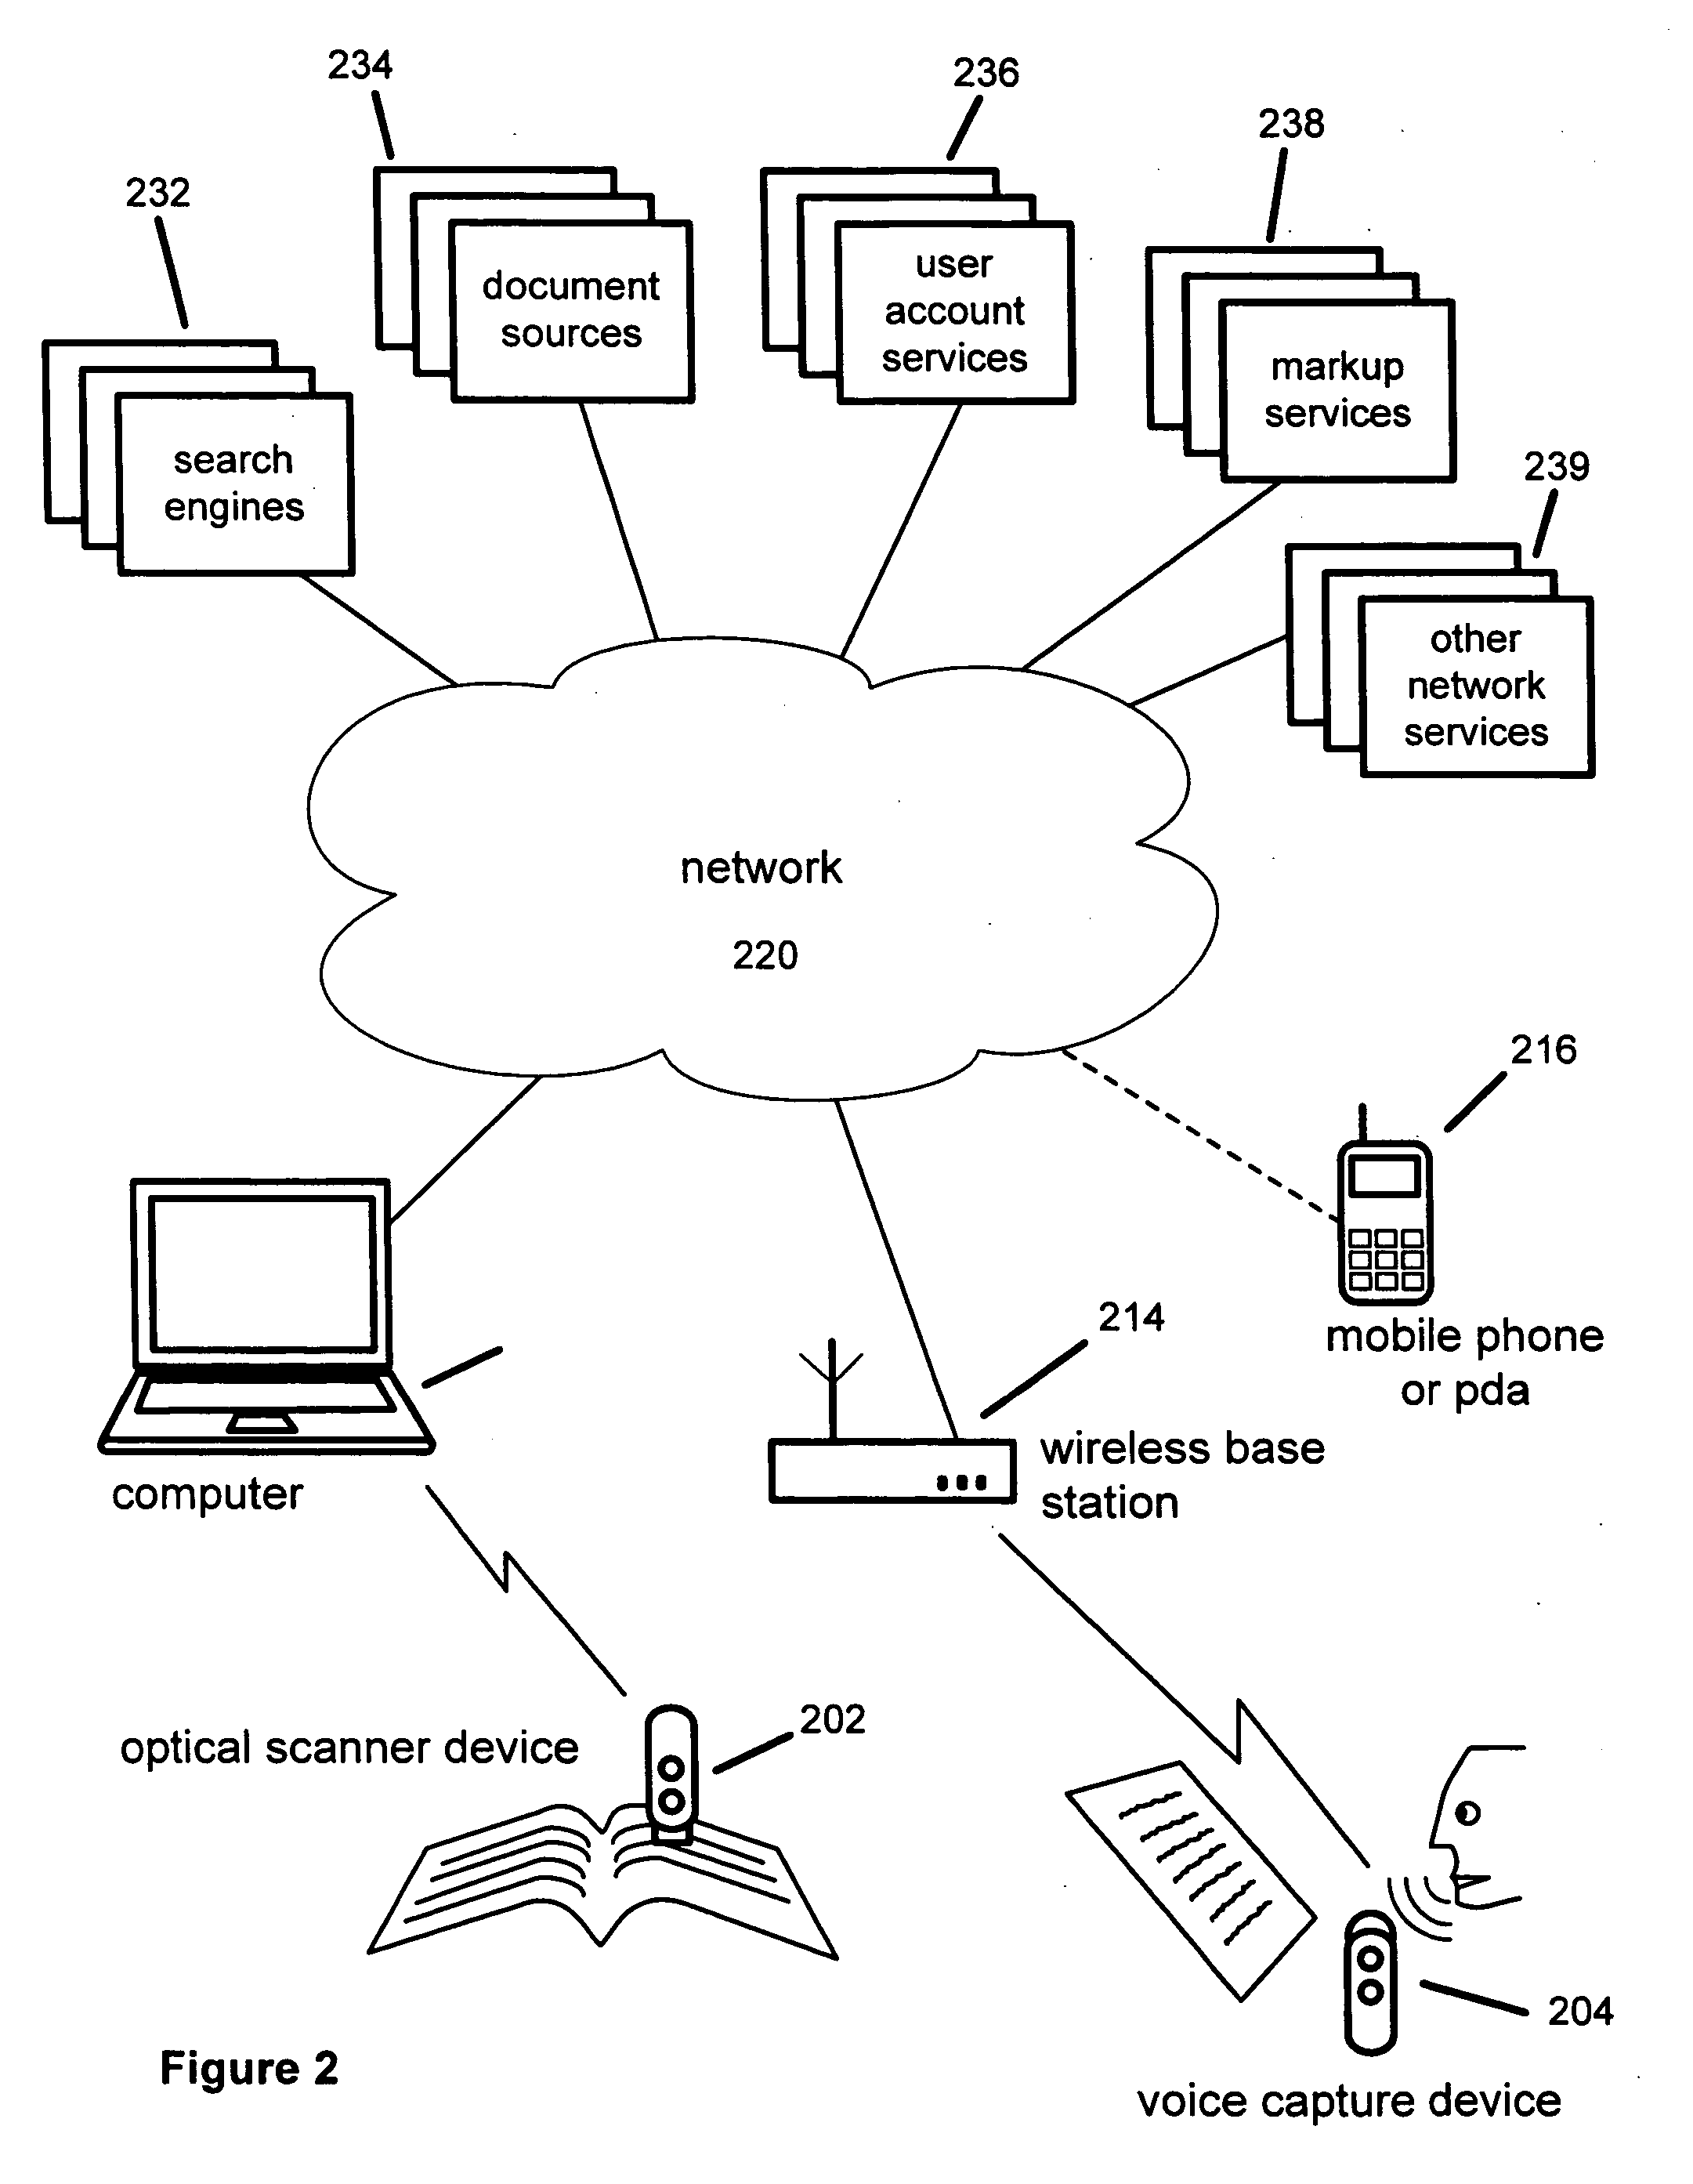 Content access with handheld document data capture devices